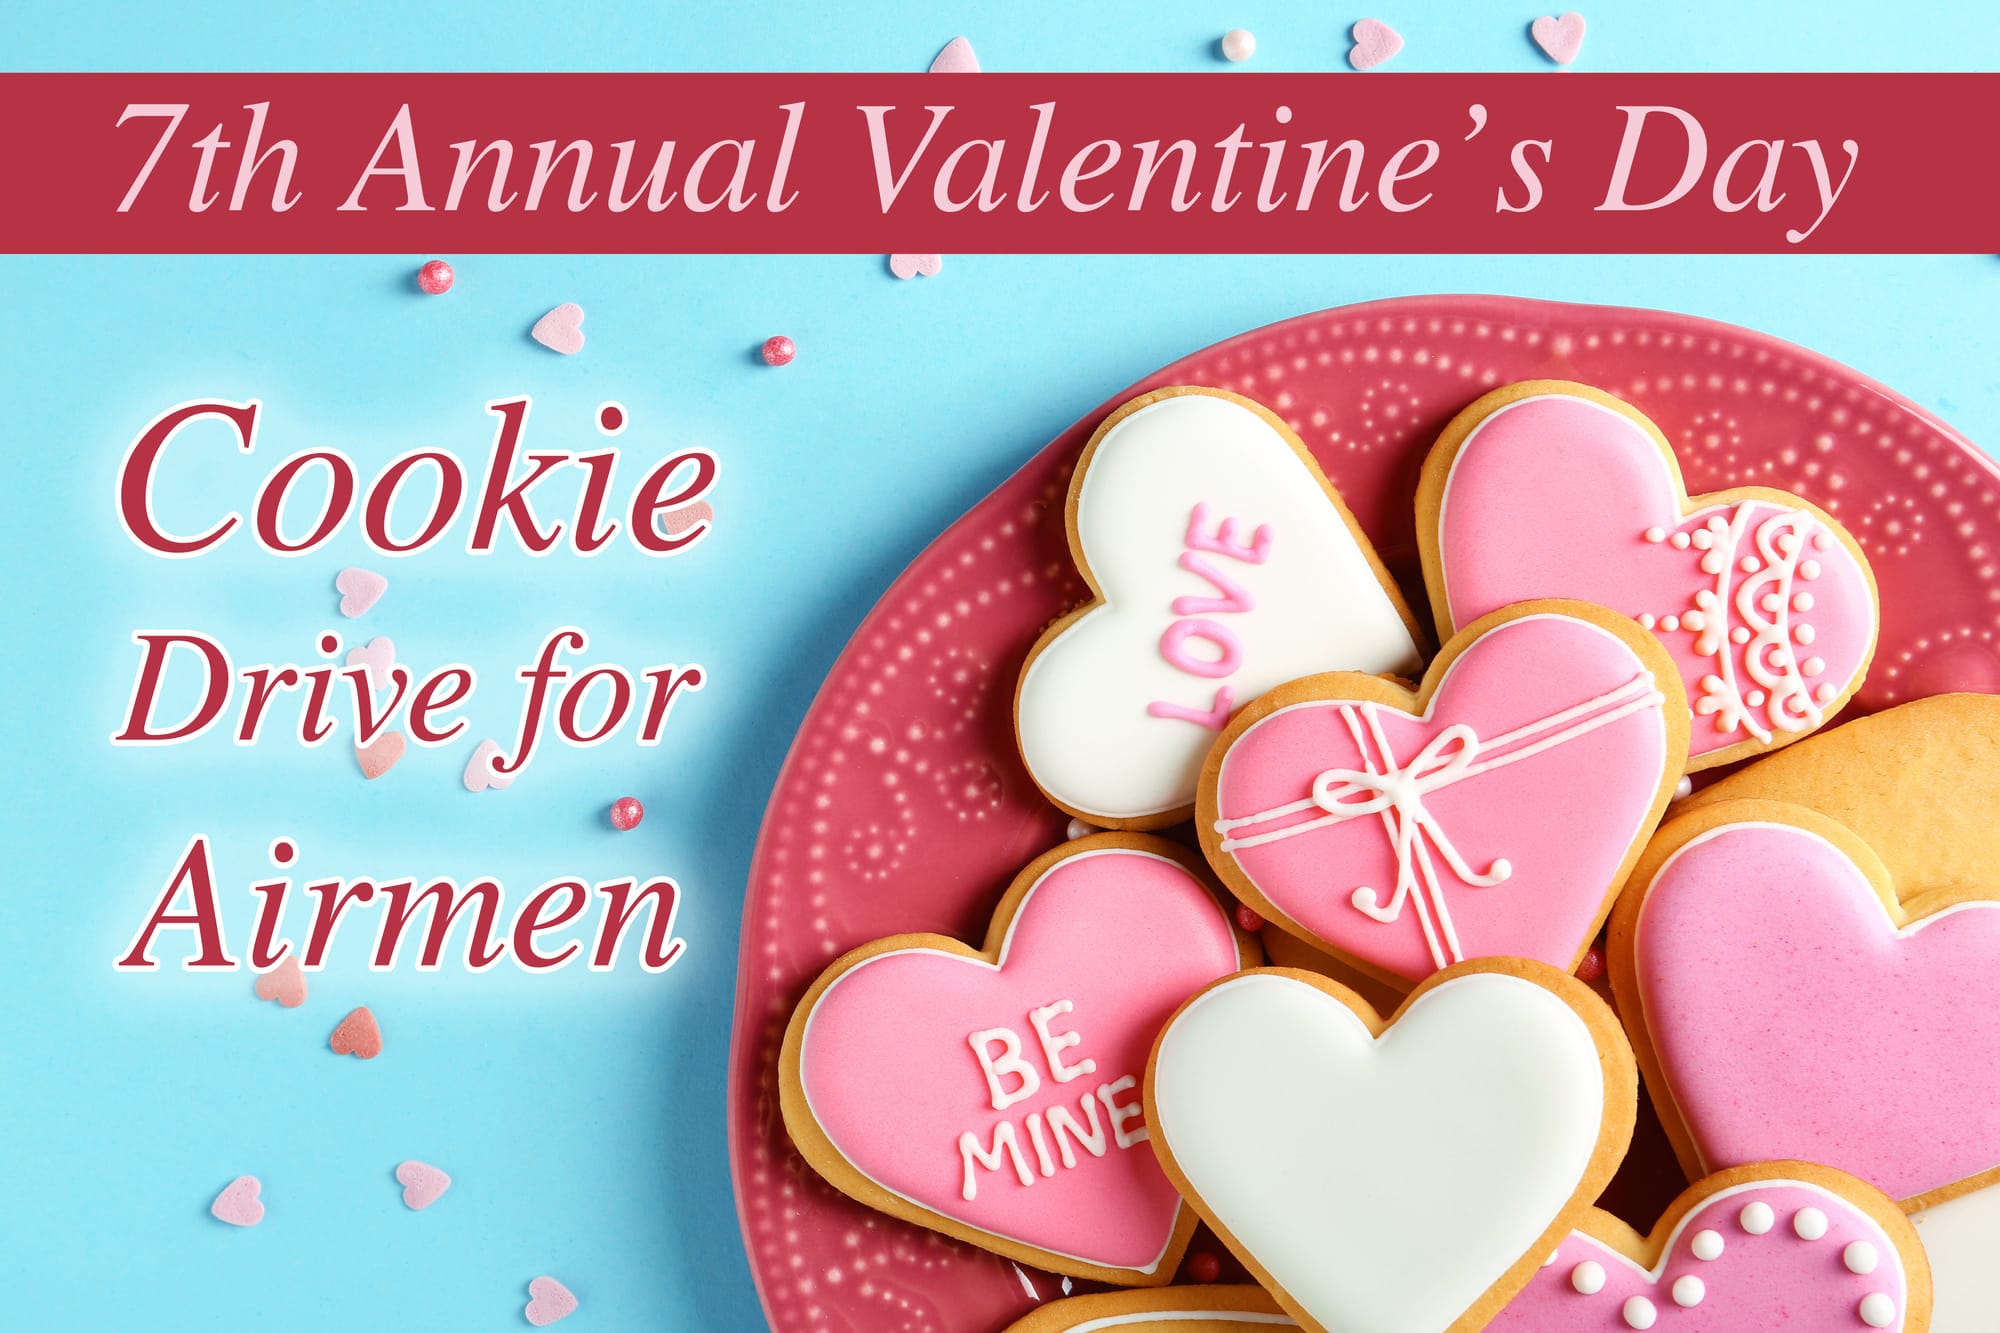 Join In On The 7th Annual Valentine's Day Cookie Drive for Airmen